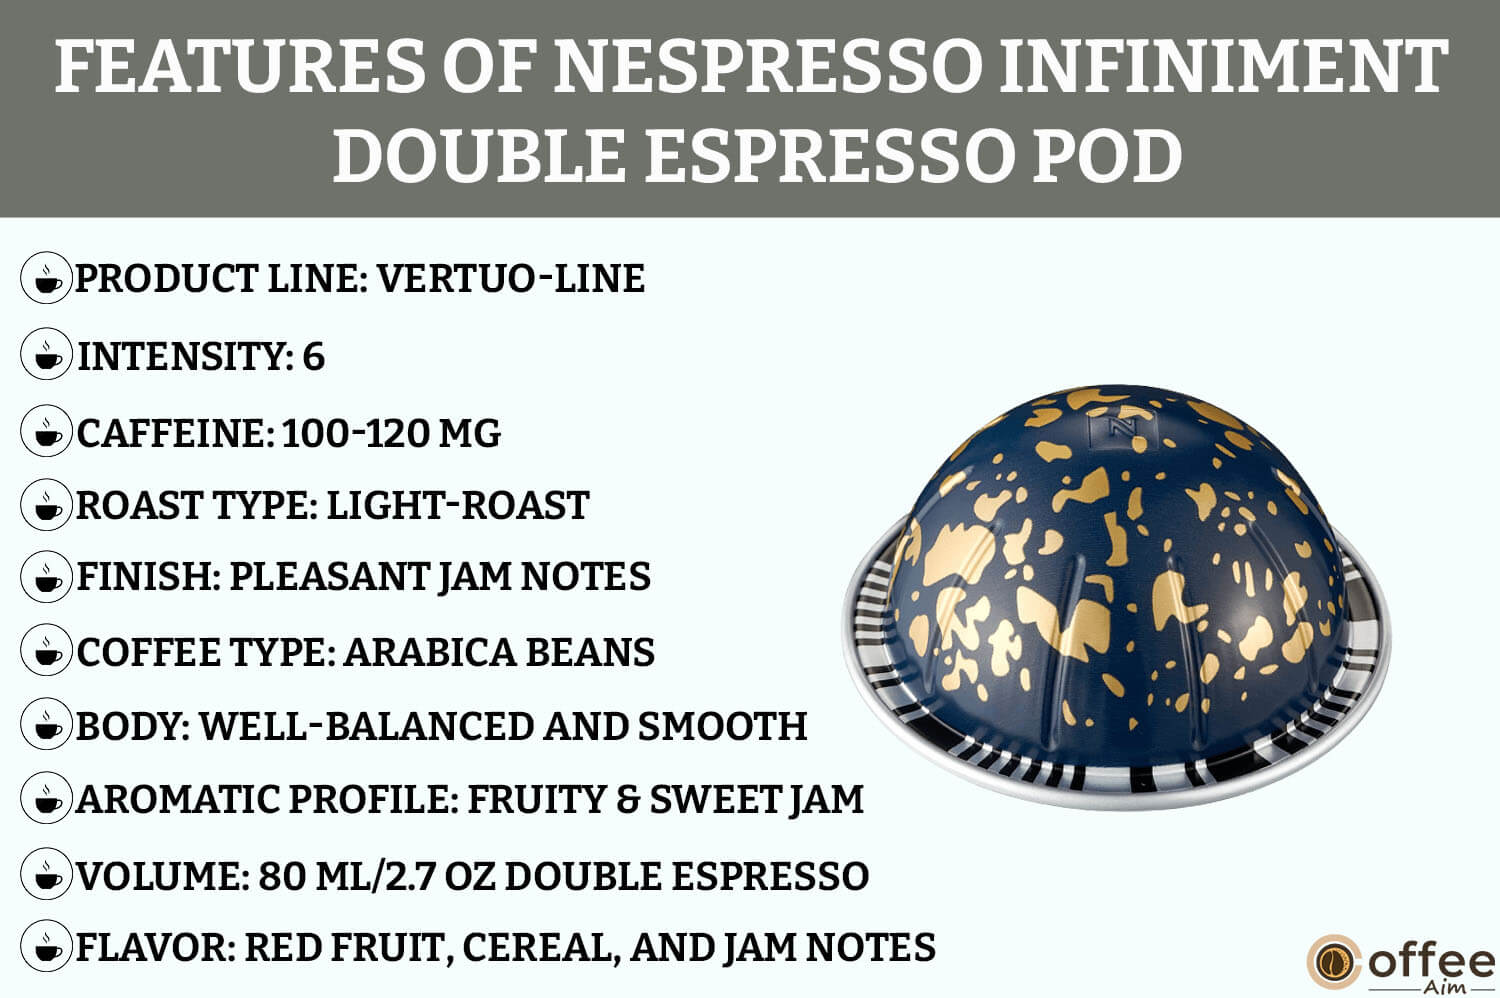 This image showcases the features of the Infiniment Double Espresso Nespresso Vertuoline Pod for our "Infiniment Double Espresso Nespresso Pod Review" article.